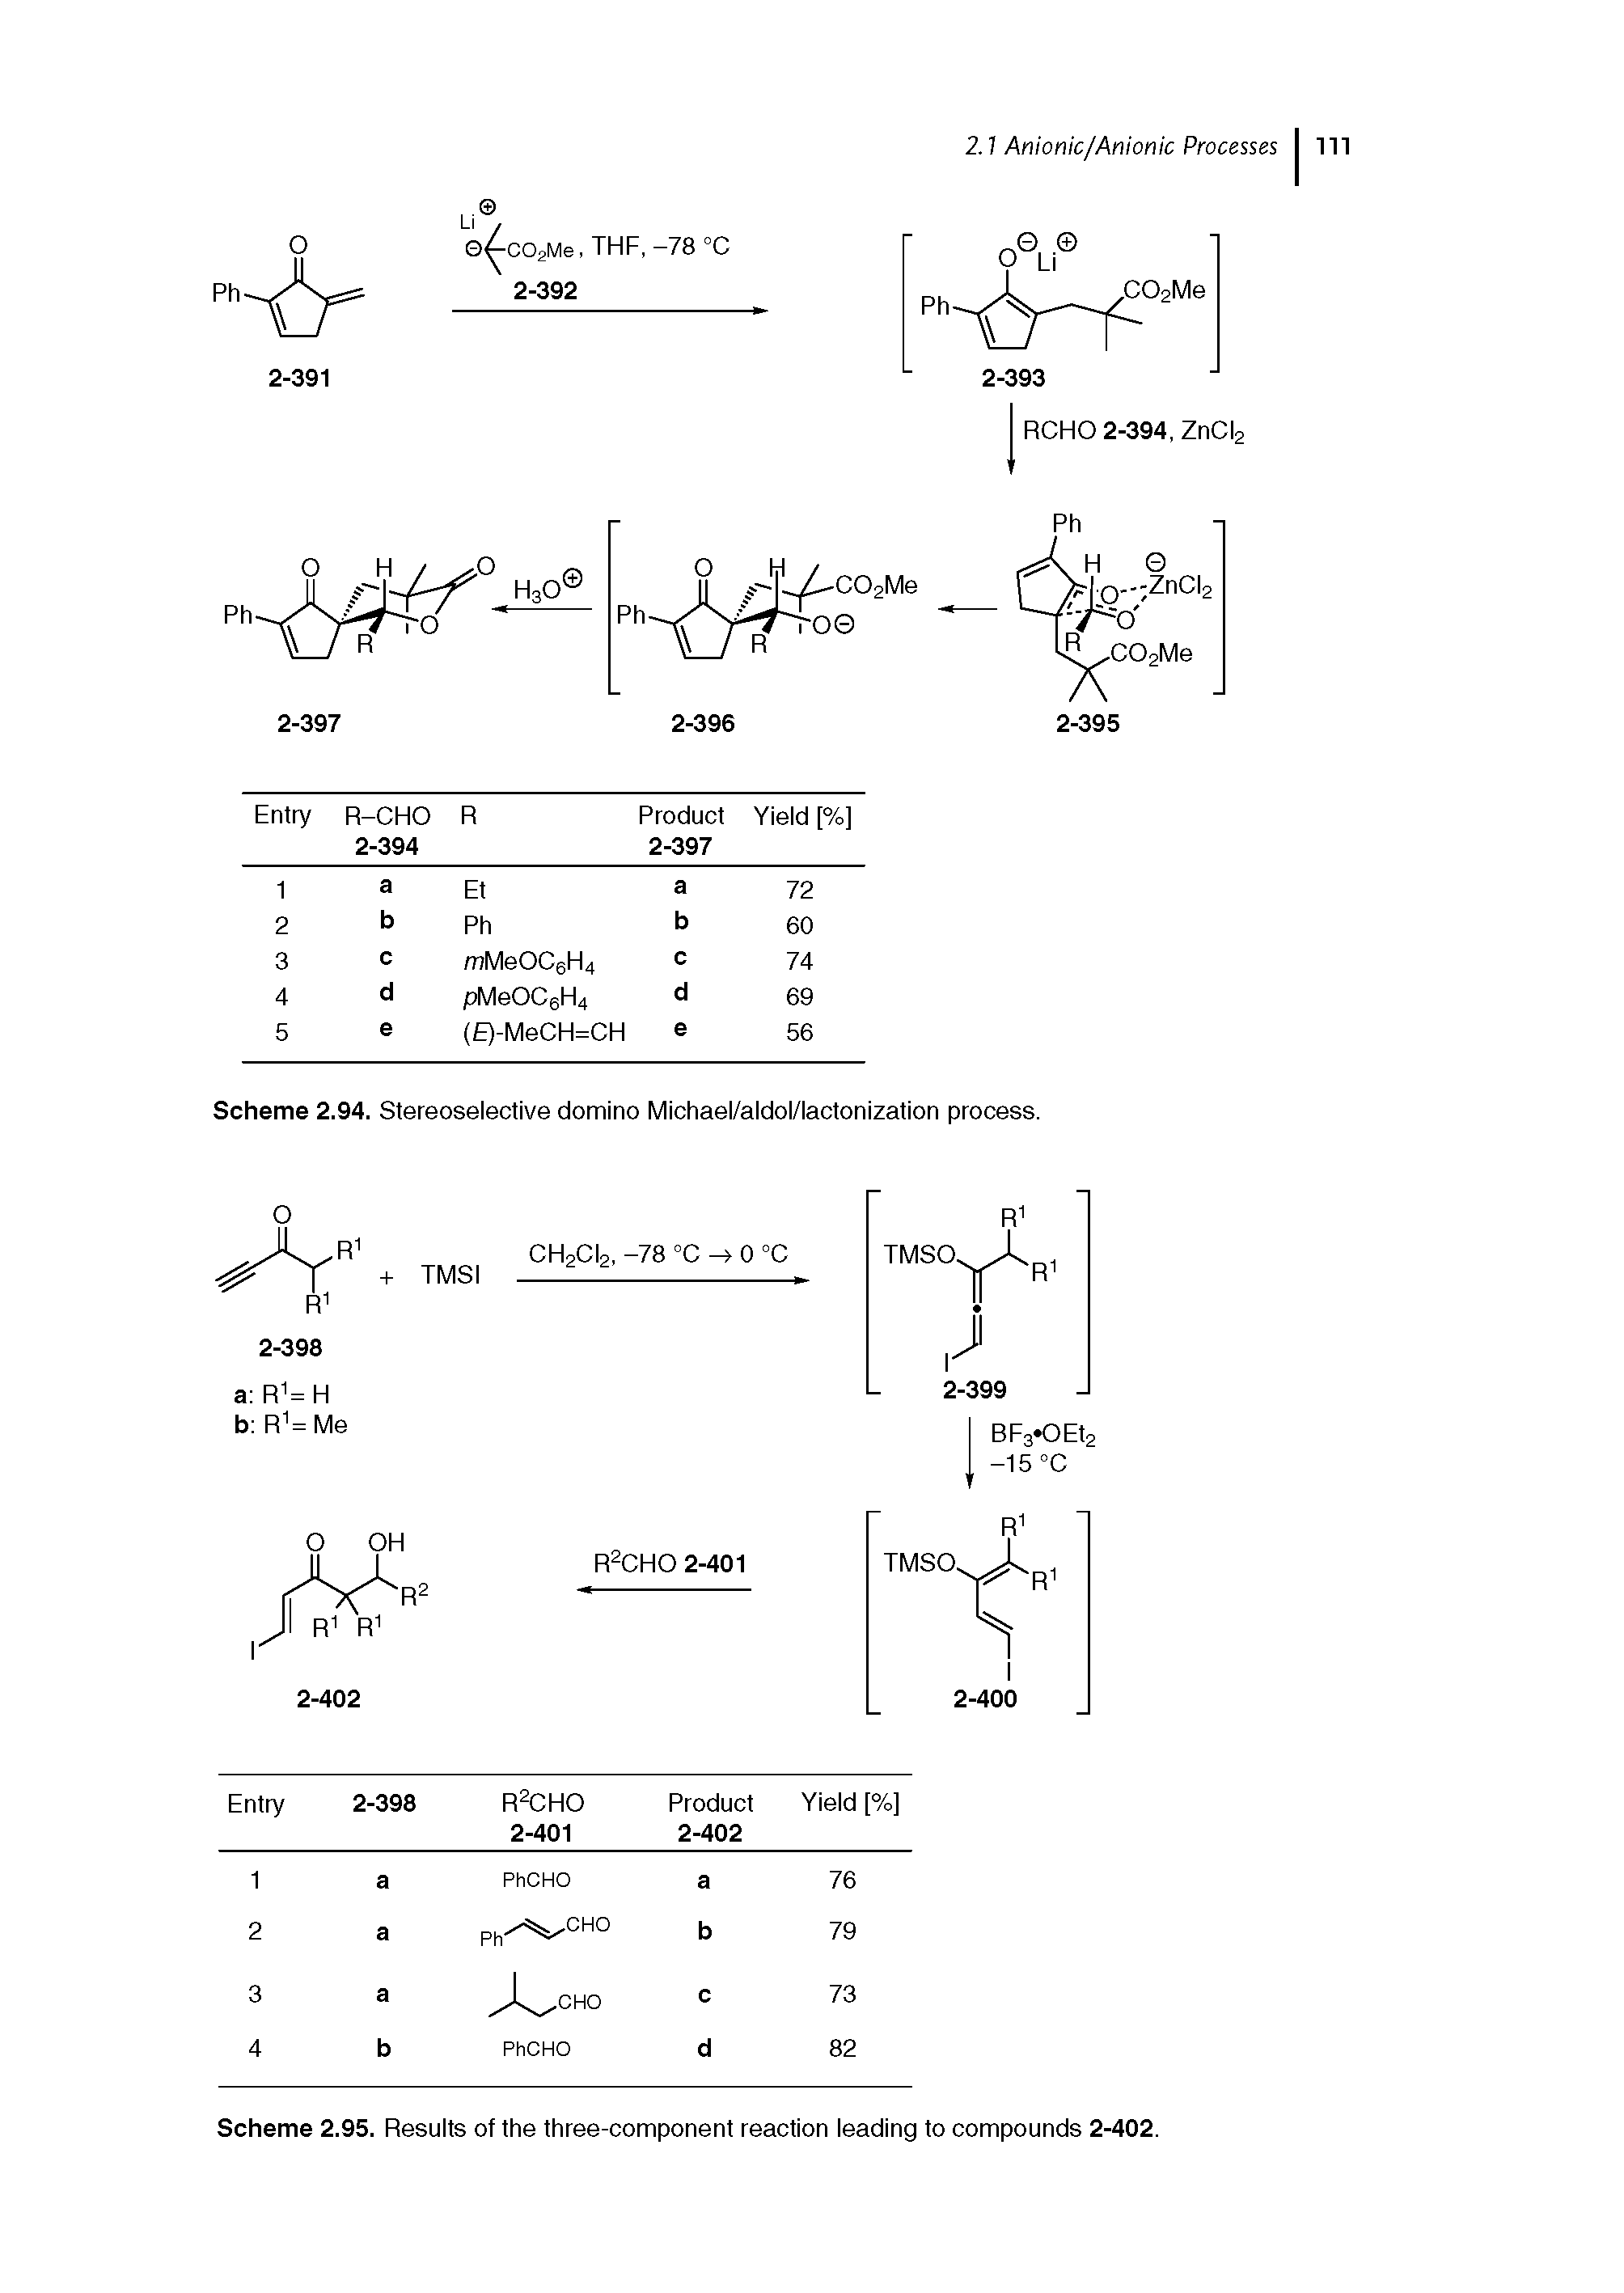 Scheme 2.95. Results of the three-component reaction leading to compounds 2-402.